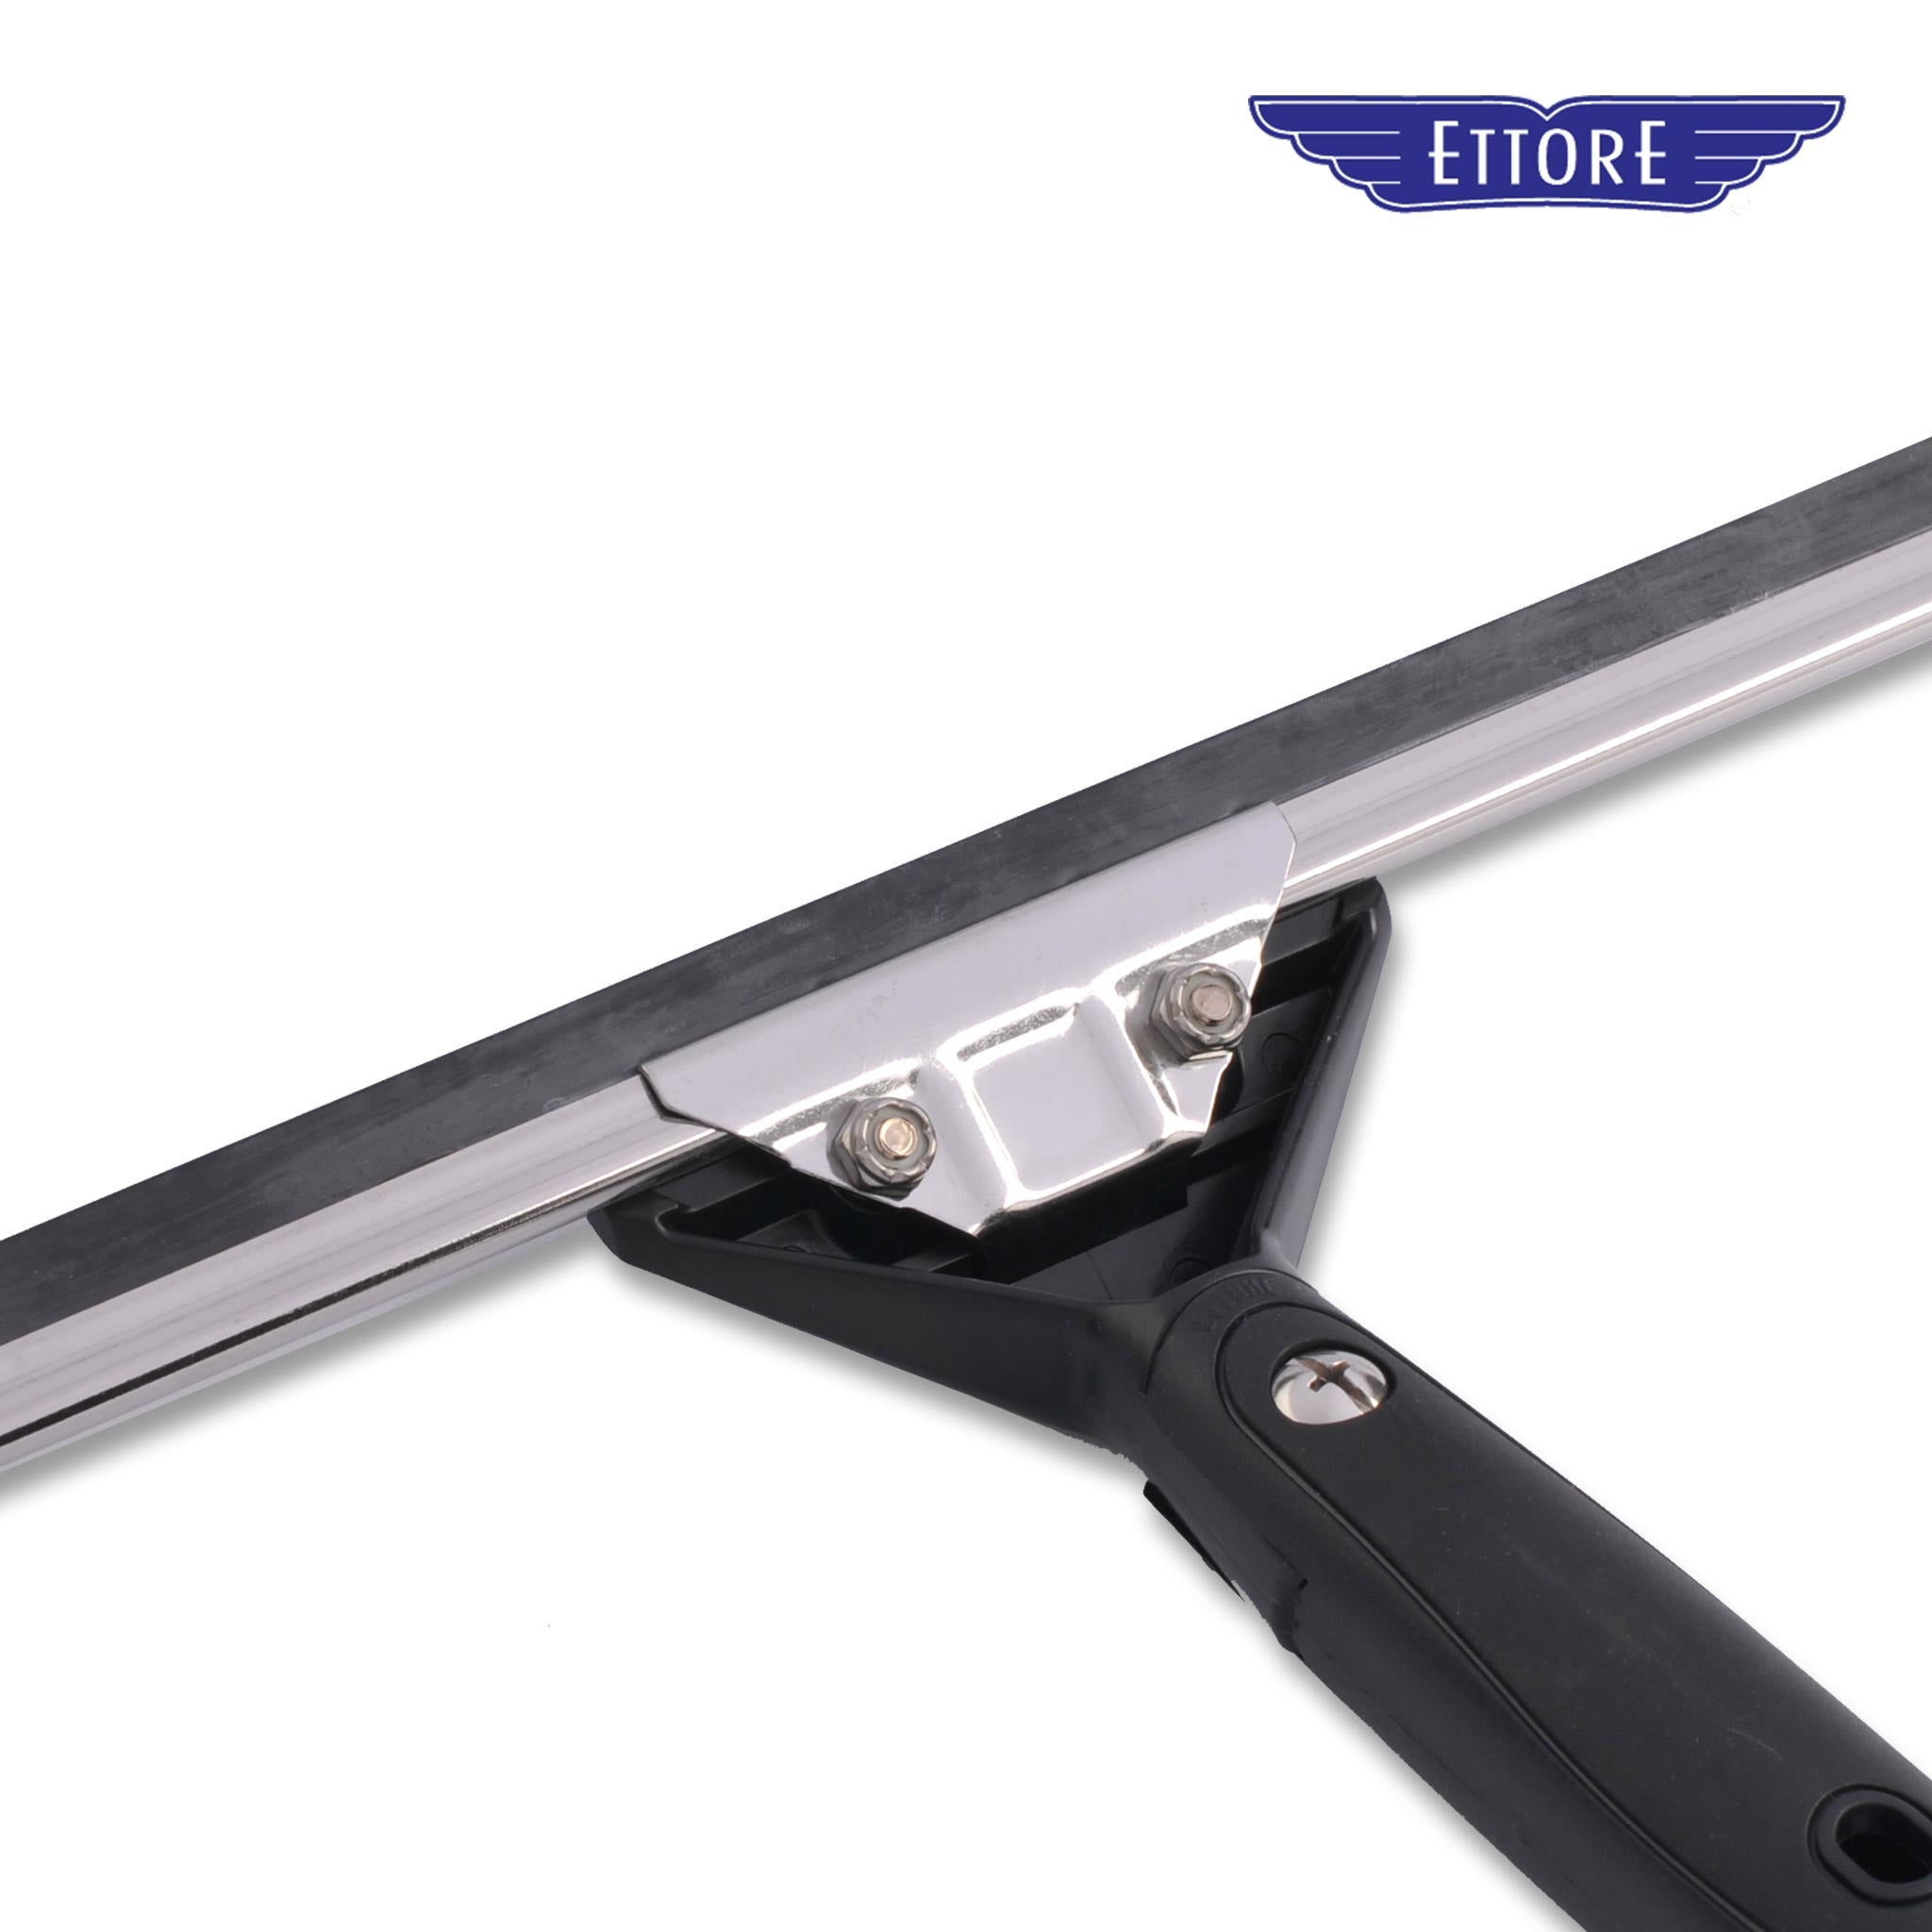 Ettore ProPlus Super Squeegee - Stainless Steel